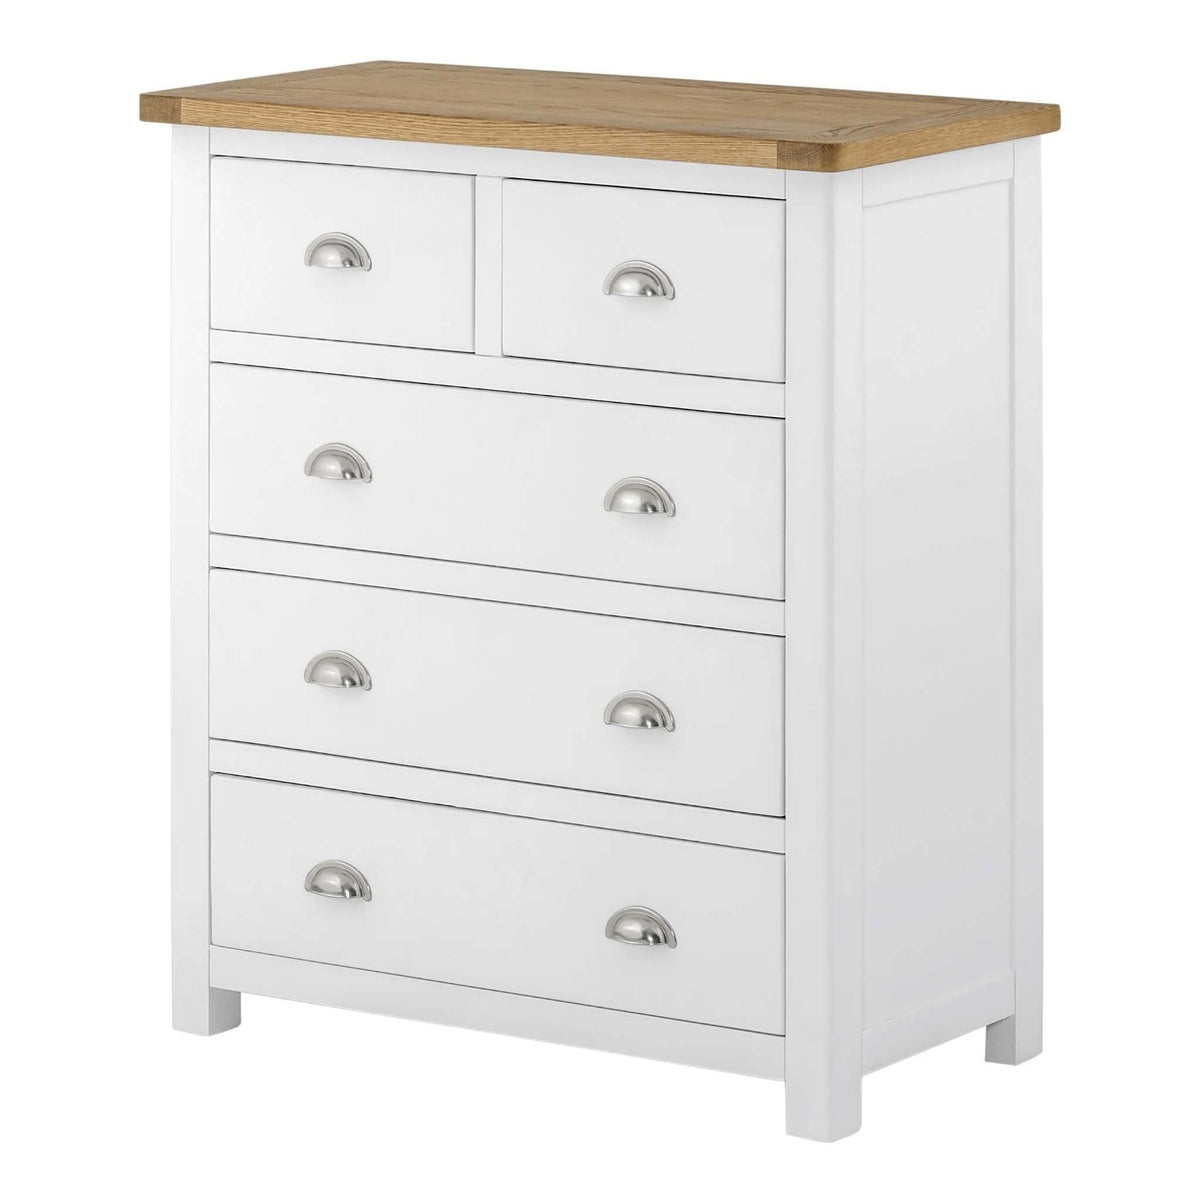 The Padstow White Wooden Chest of Drawers from Roseland Furniture